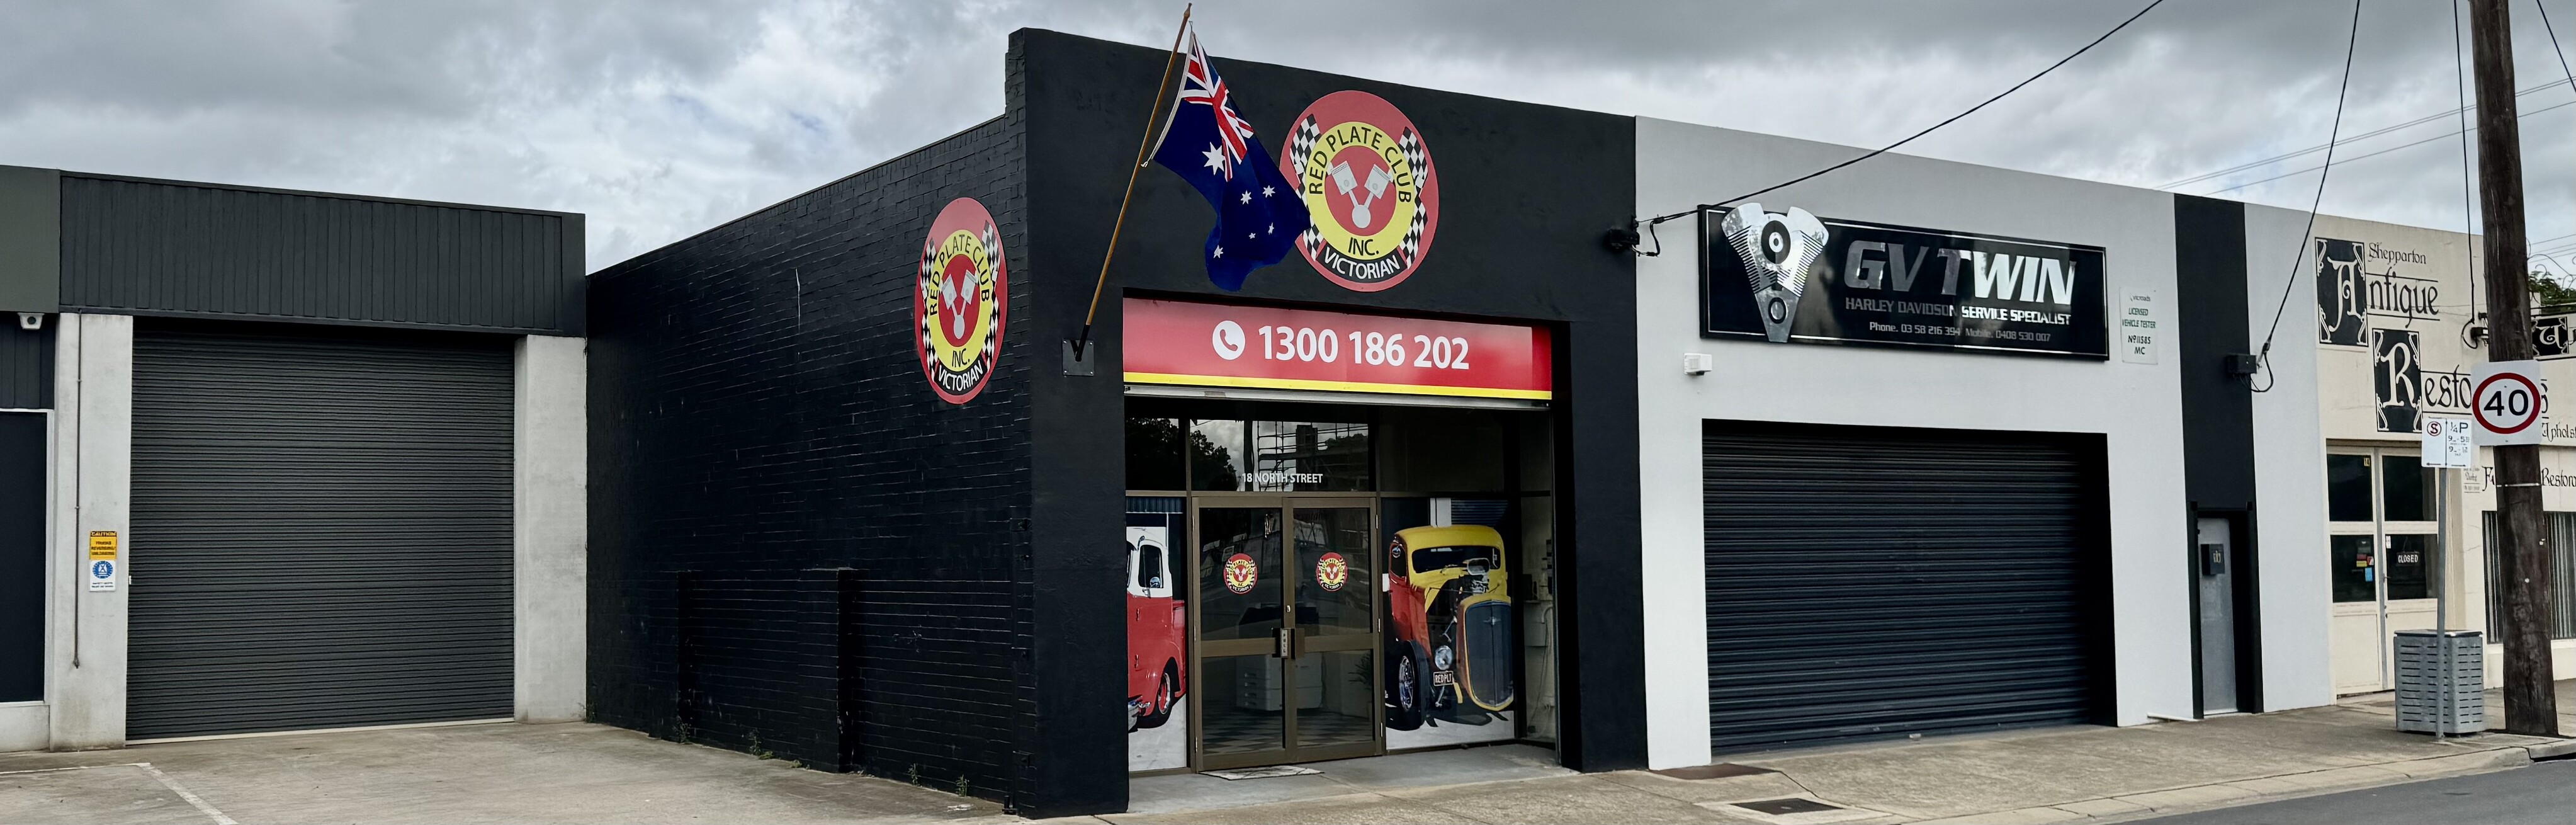 Victorian Red Plate Club office.  18 North St Shepparton.  Post to P.O. Box 1 Mooroopna 3629